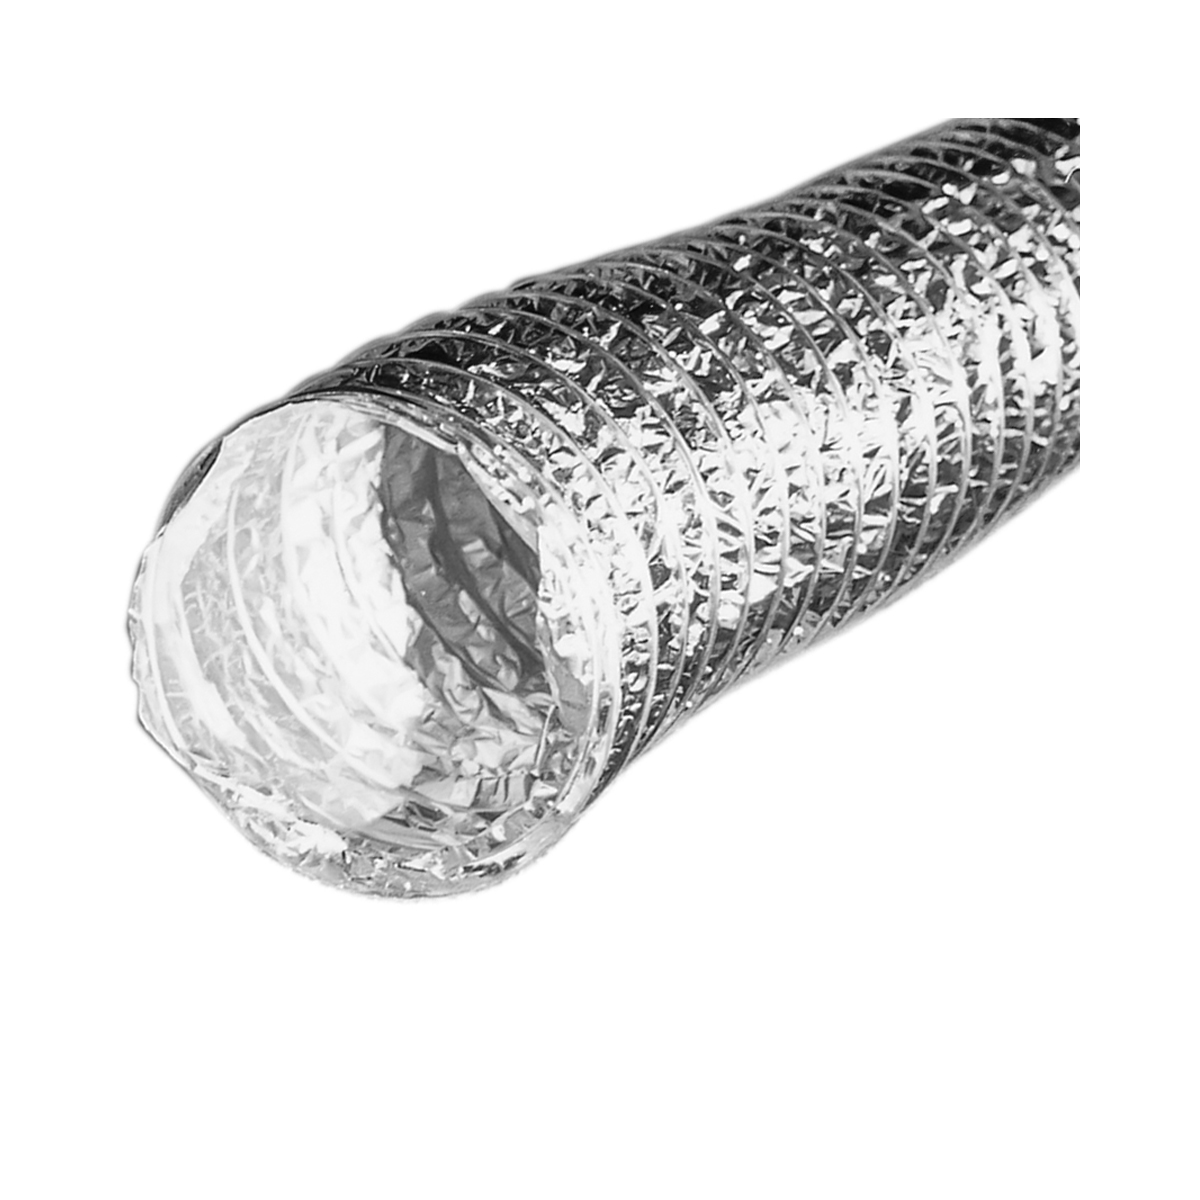 Builder's Best 010203 Foil Duct, 5 in, 25 ft L, Metalized Polyester/Aluminum/Polyester Laminate - 1